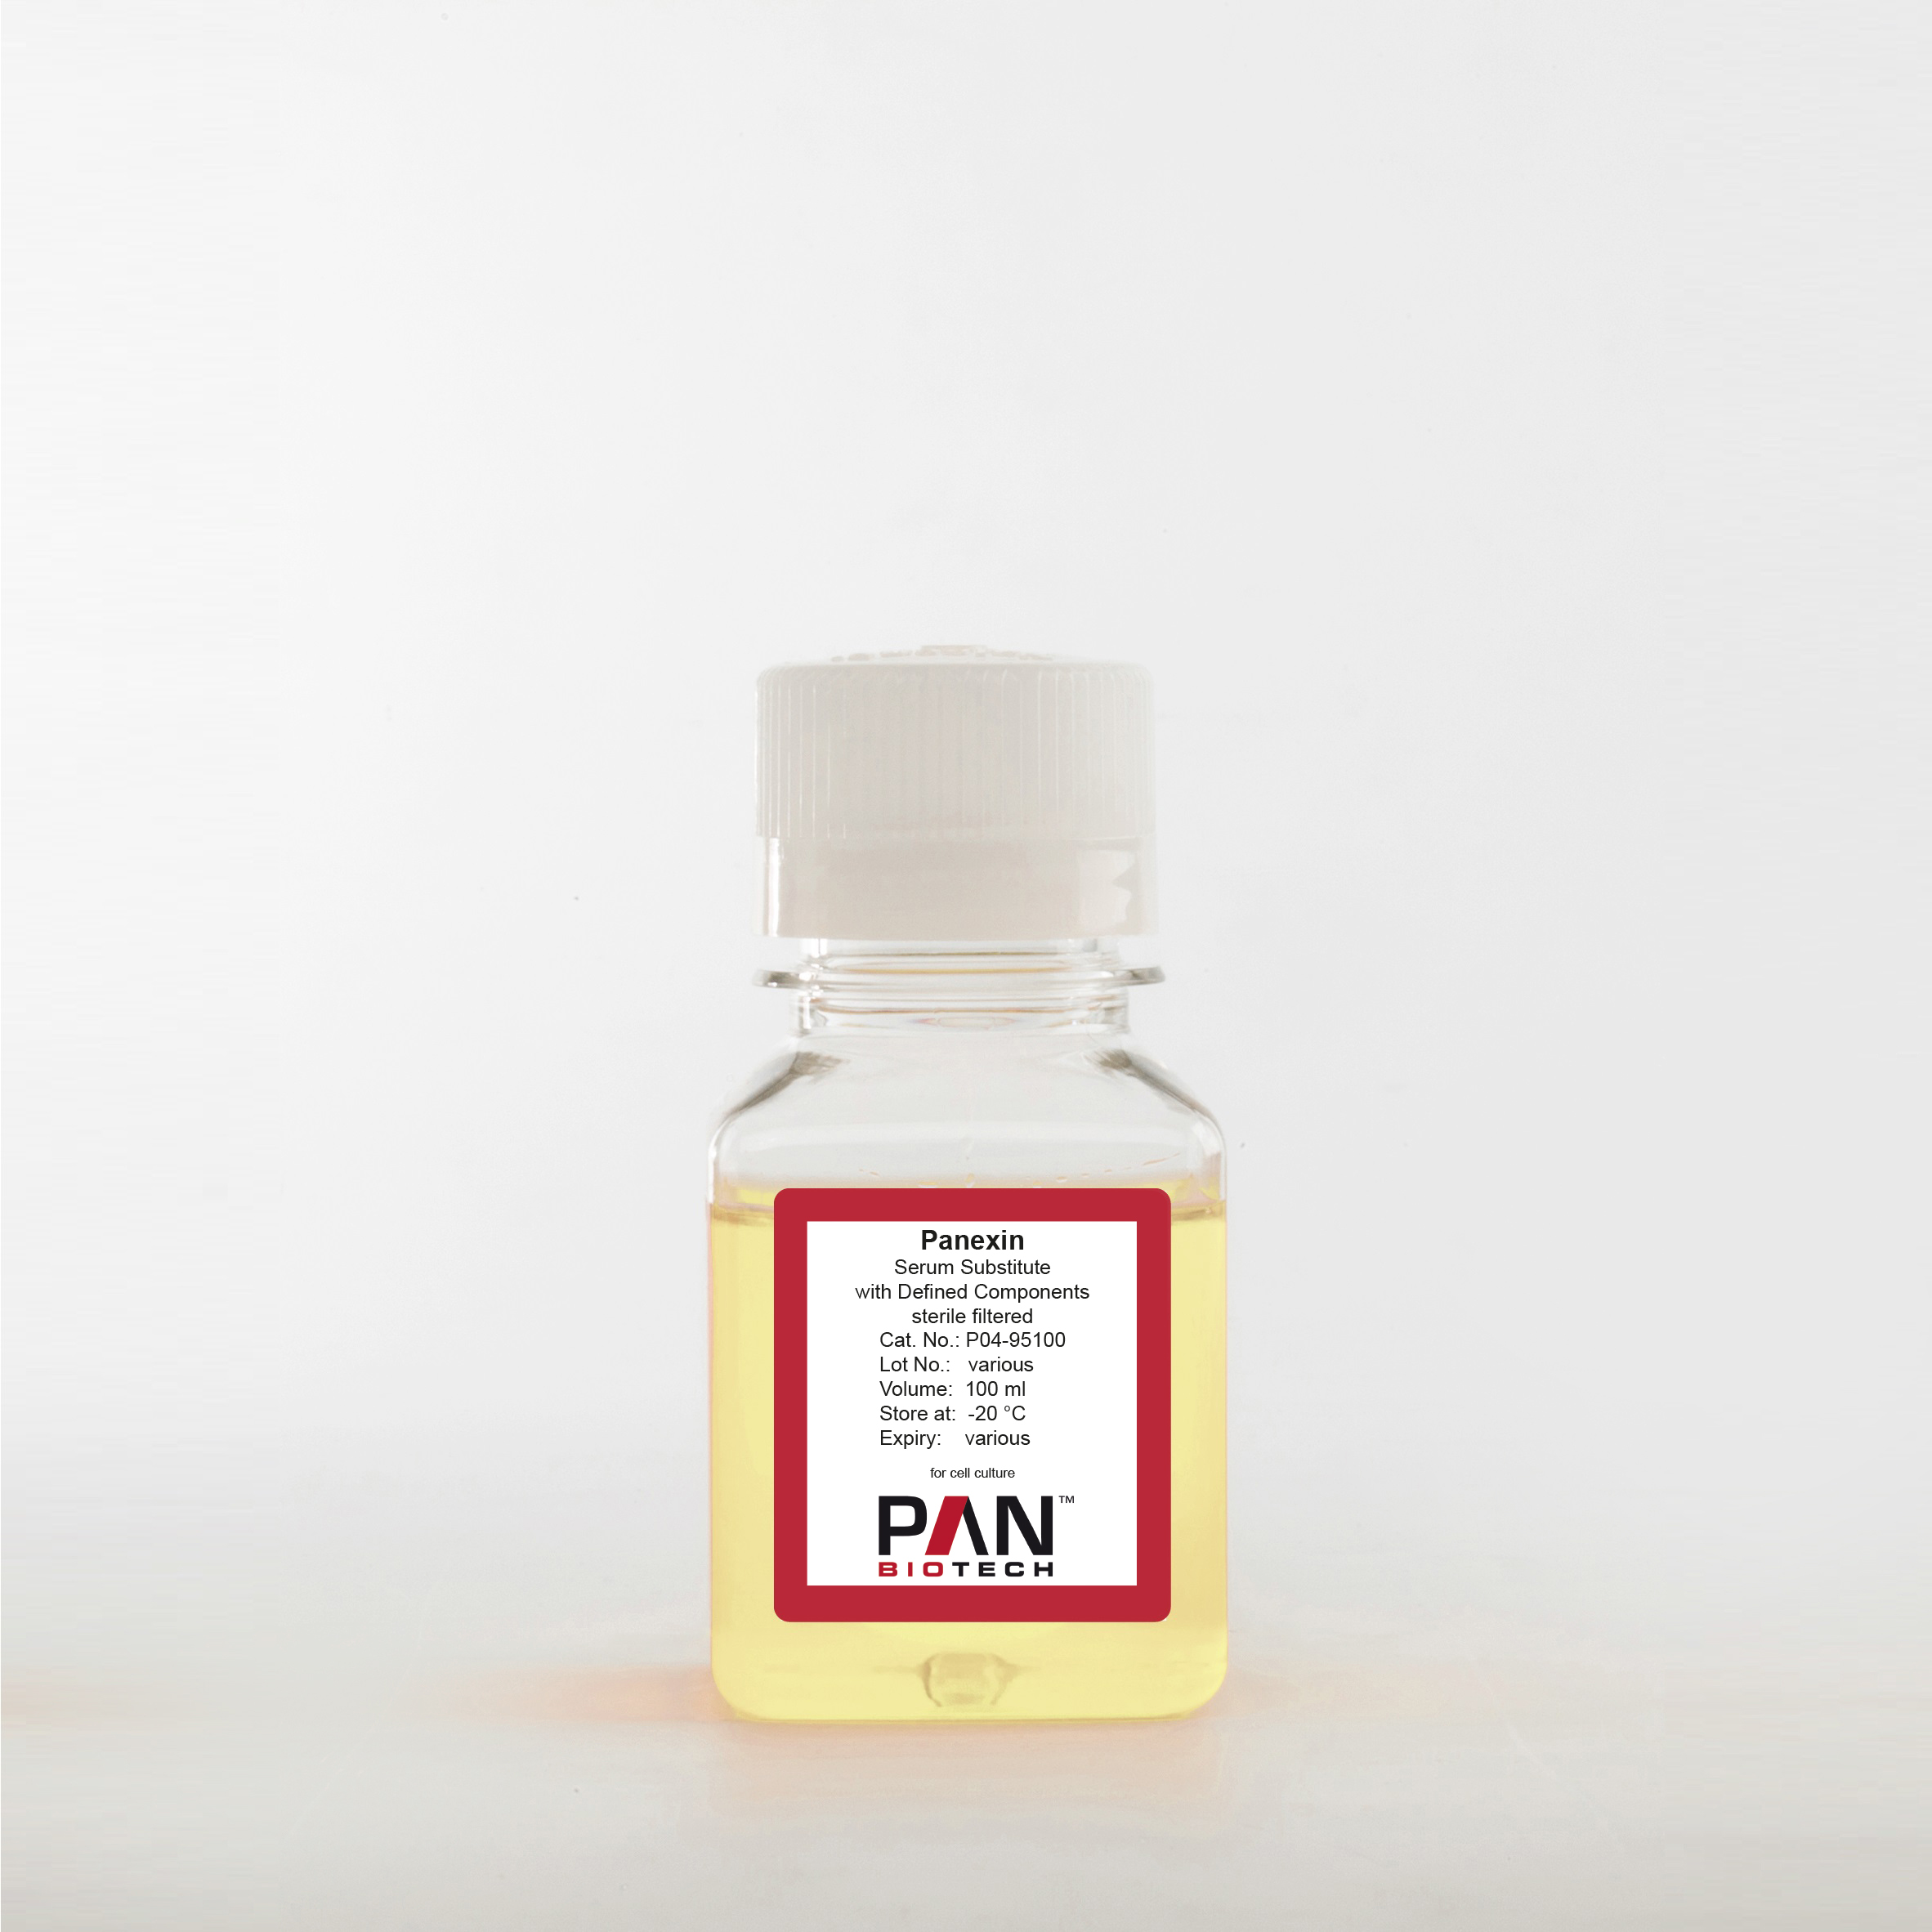 Panexin Serum Substitute with Defined Components